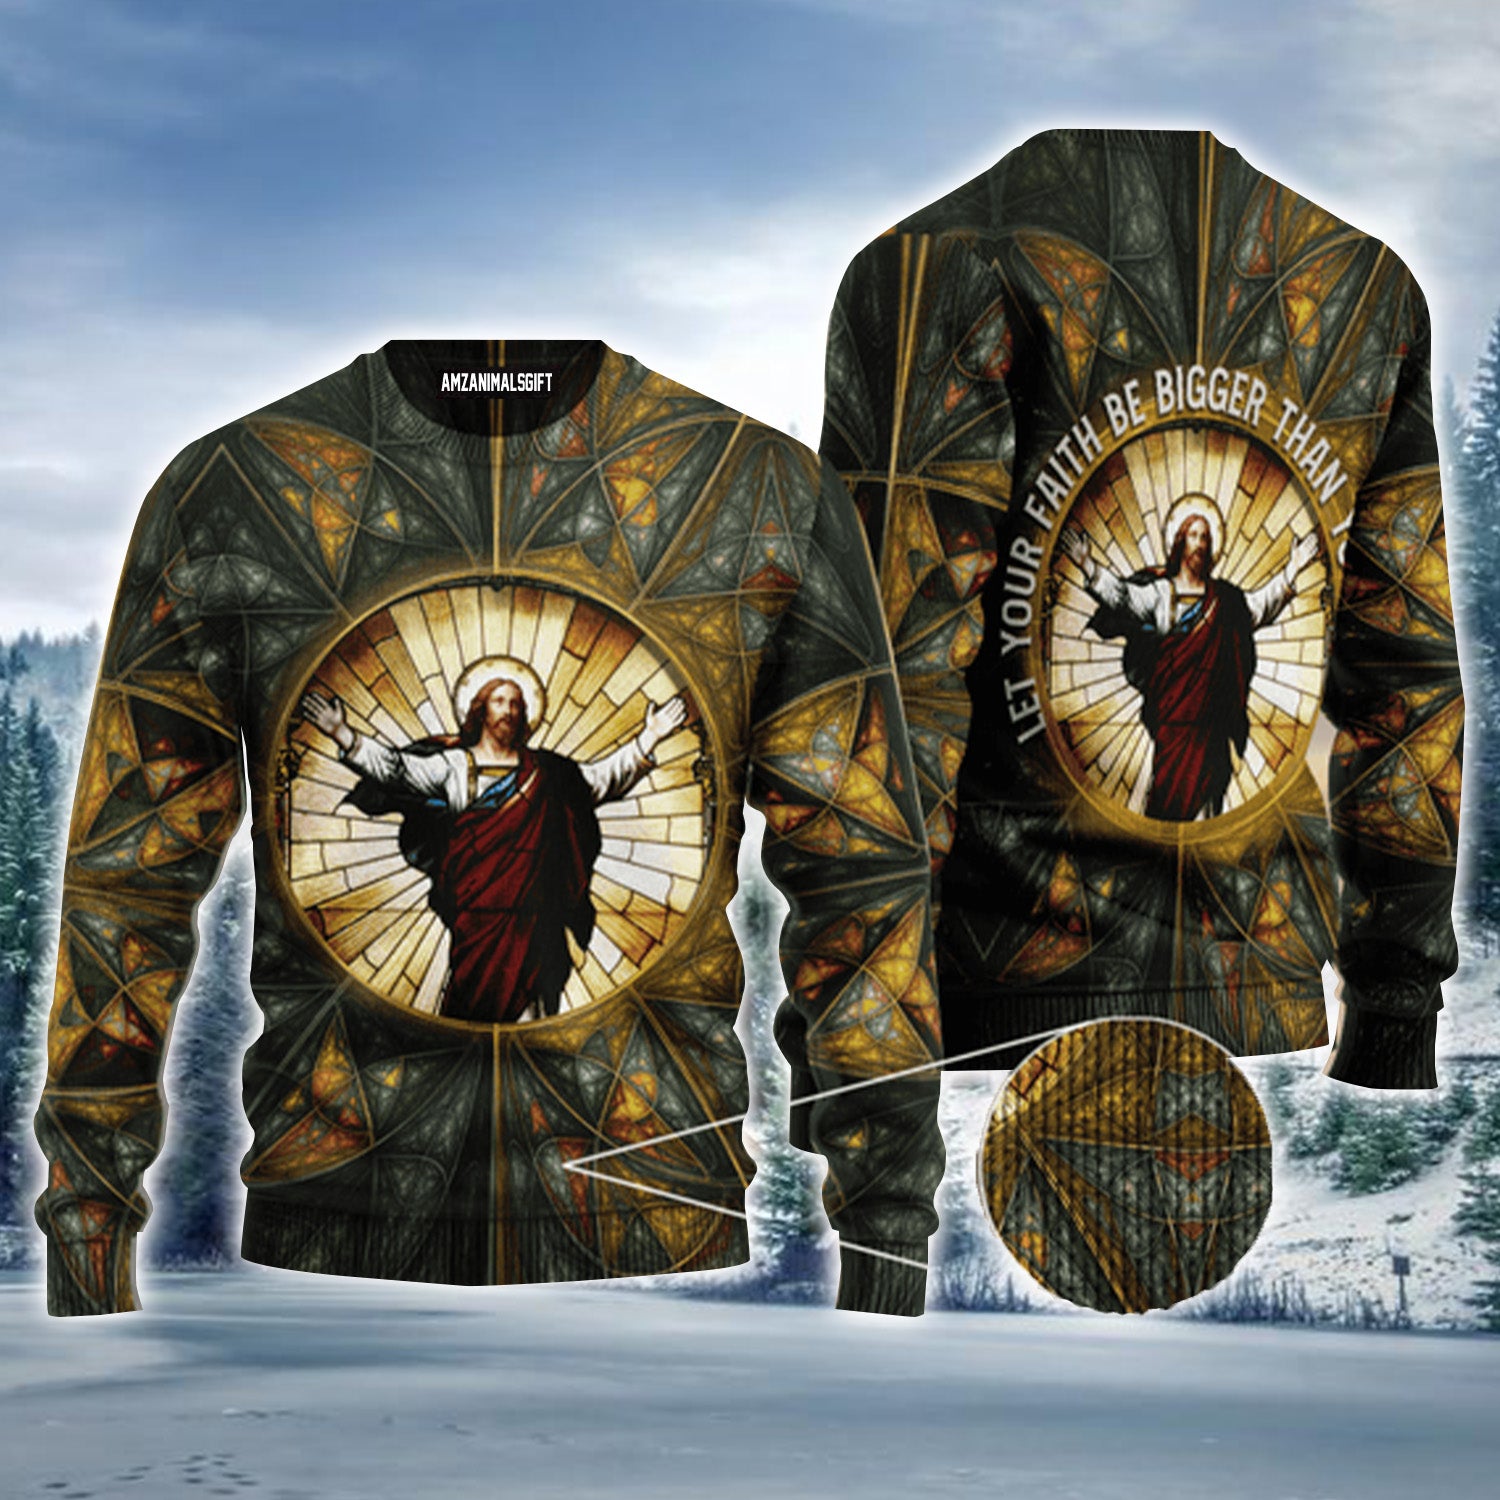 Jesus Let Your Faith Be Bigger Than Your Fear Urly Sweater, Christmas Sweater For Men & Women - Perfect Gift For New Year, Winter, Christmas